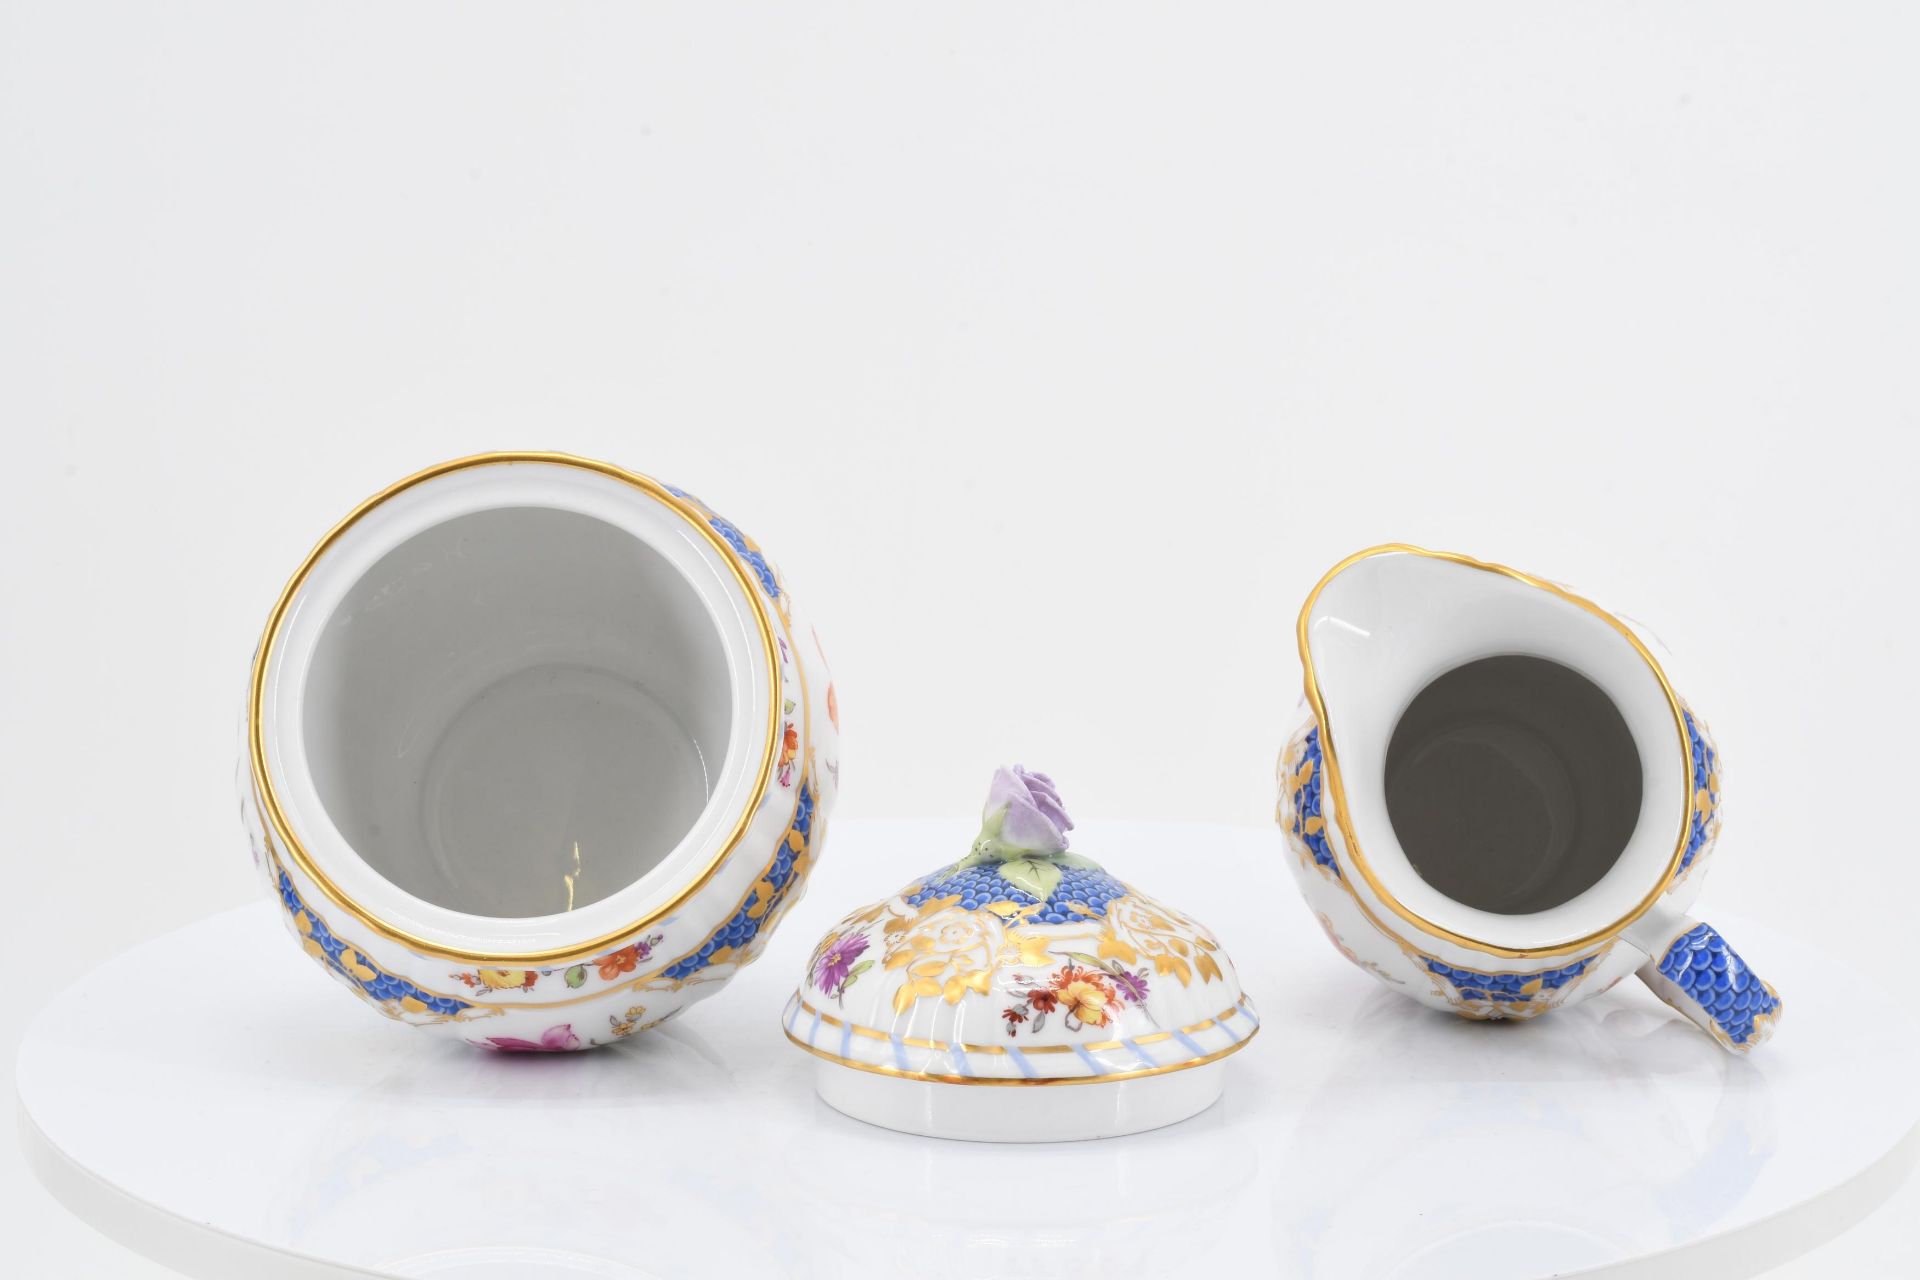 Coffee service 'Breslauer Stadtschloss' for 6 persons - Image 13 of 27